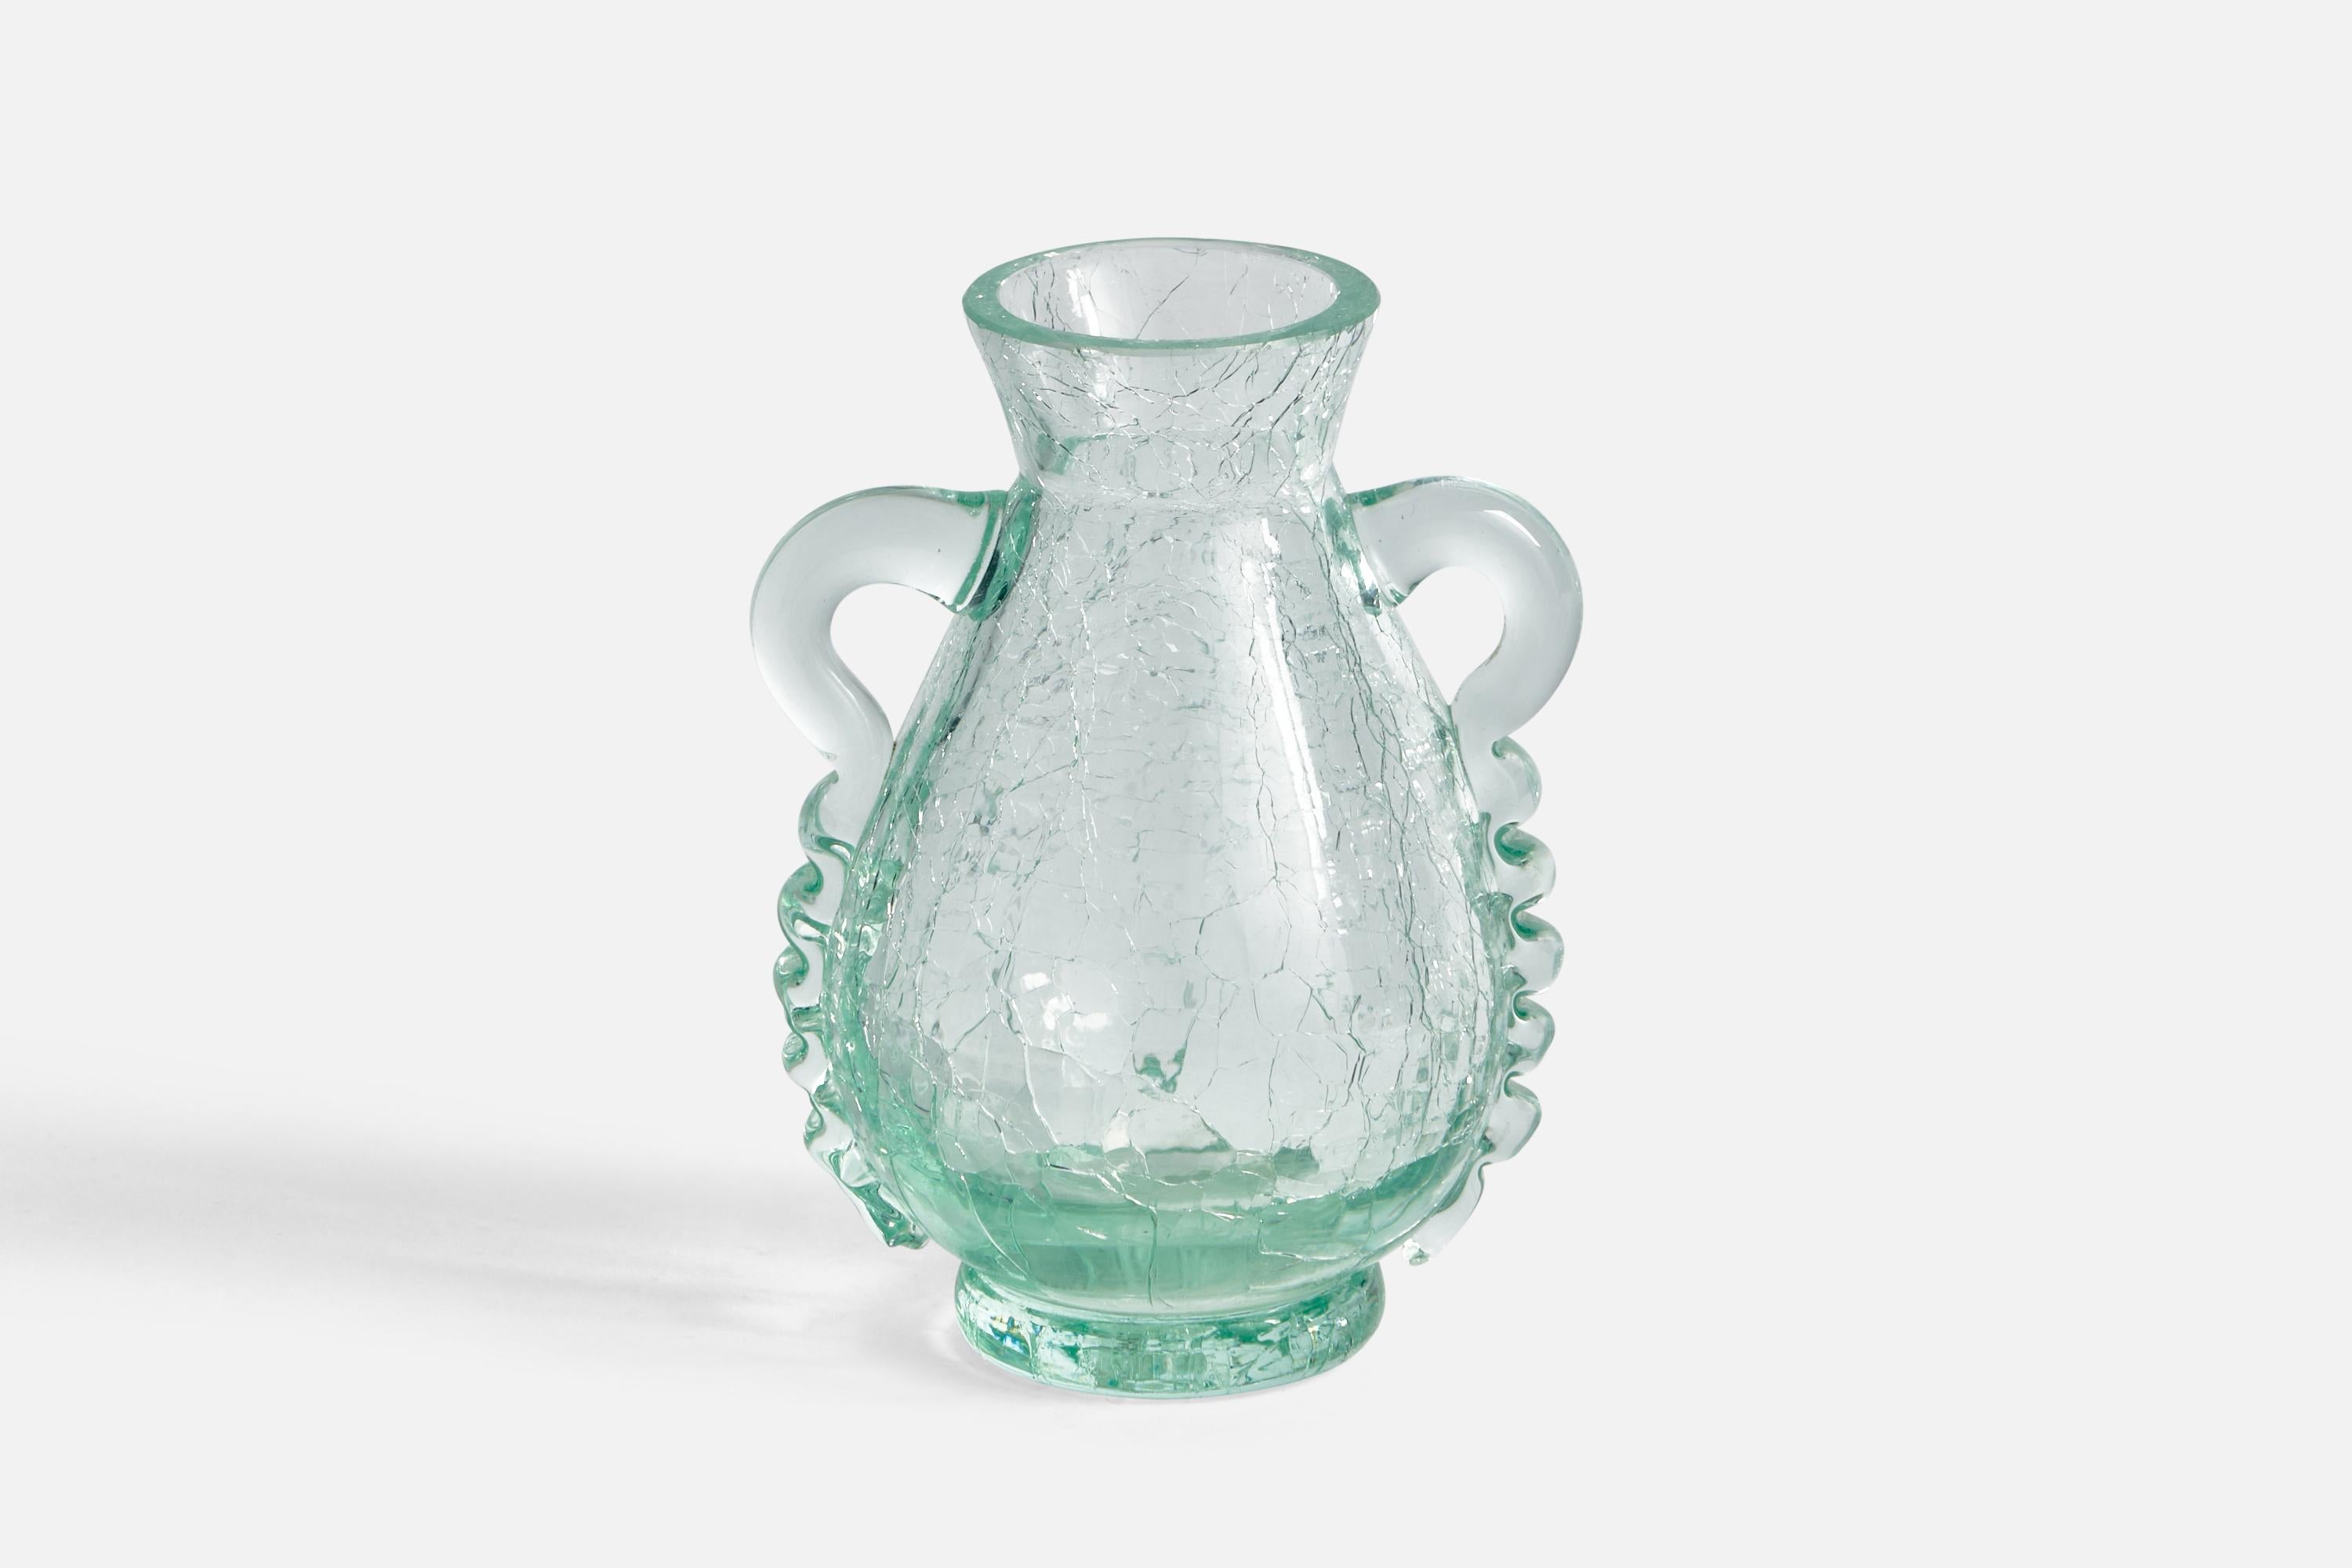 A blown glass vase designed by Ture Berglund and produced by Skansens Glasbruk, Sweden, 1940s.